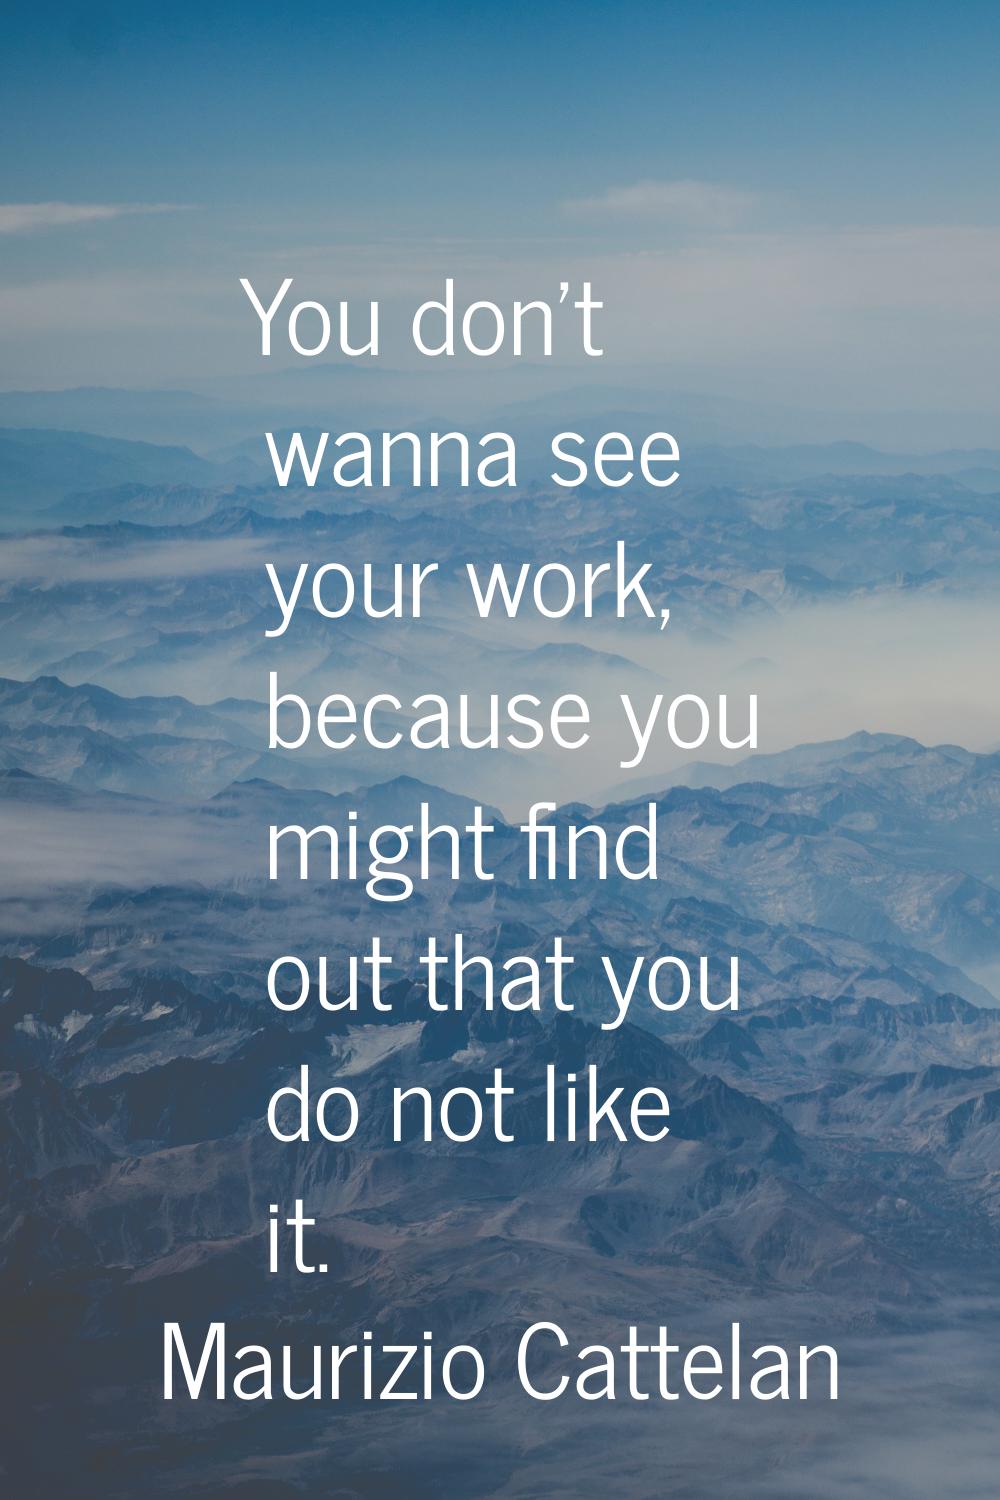 You don't wanna see your work, because you might find out that you do not like it.